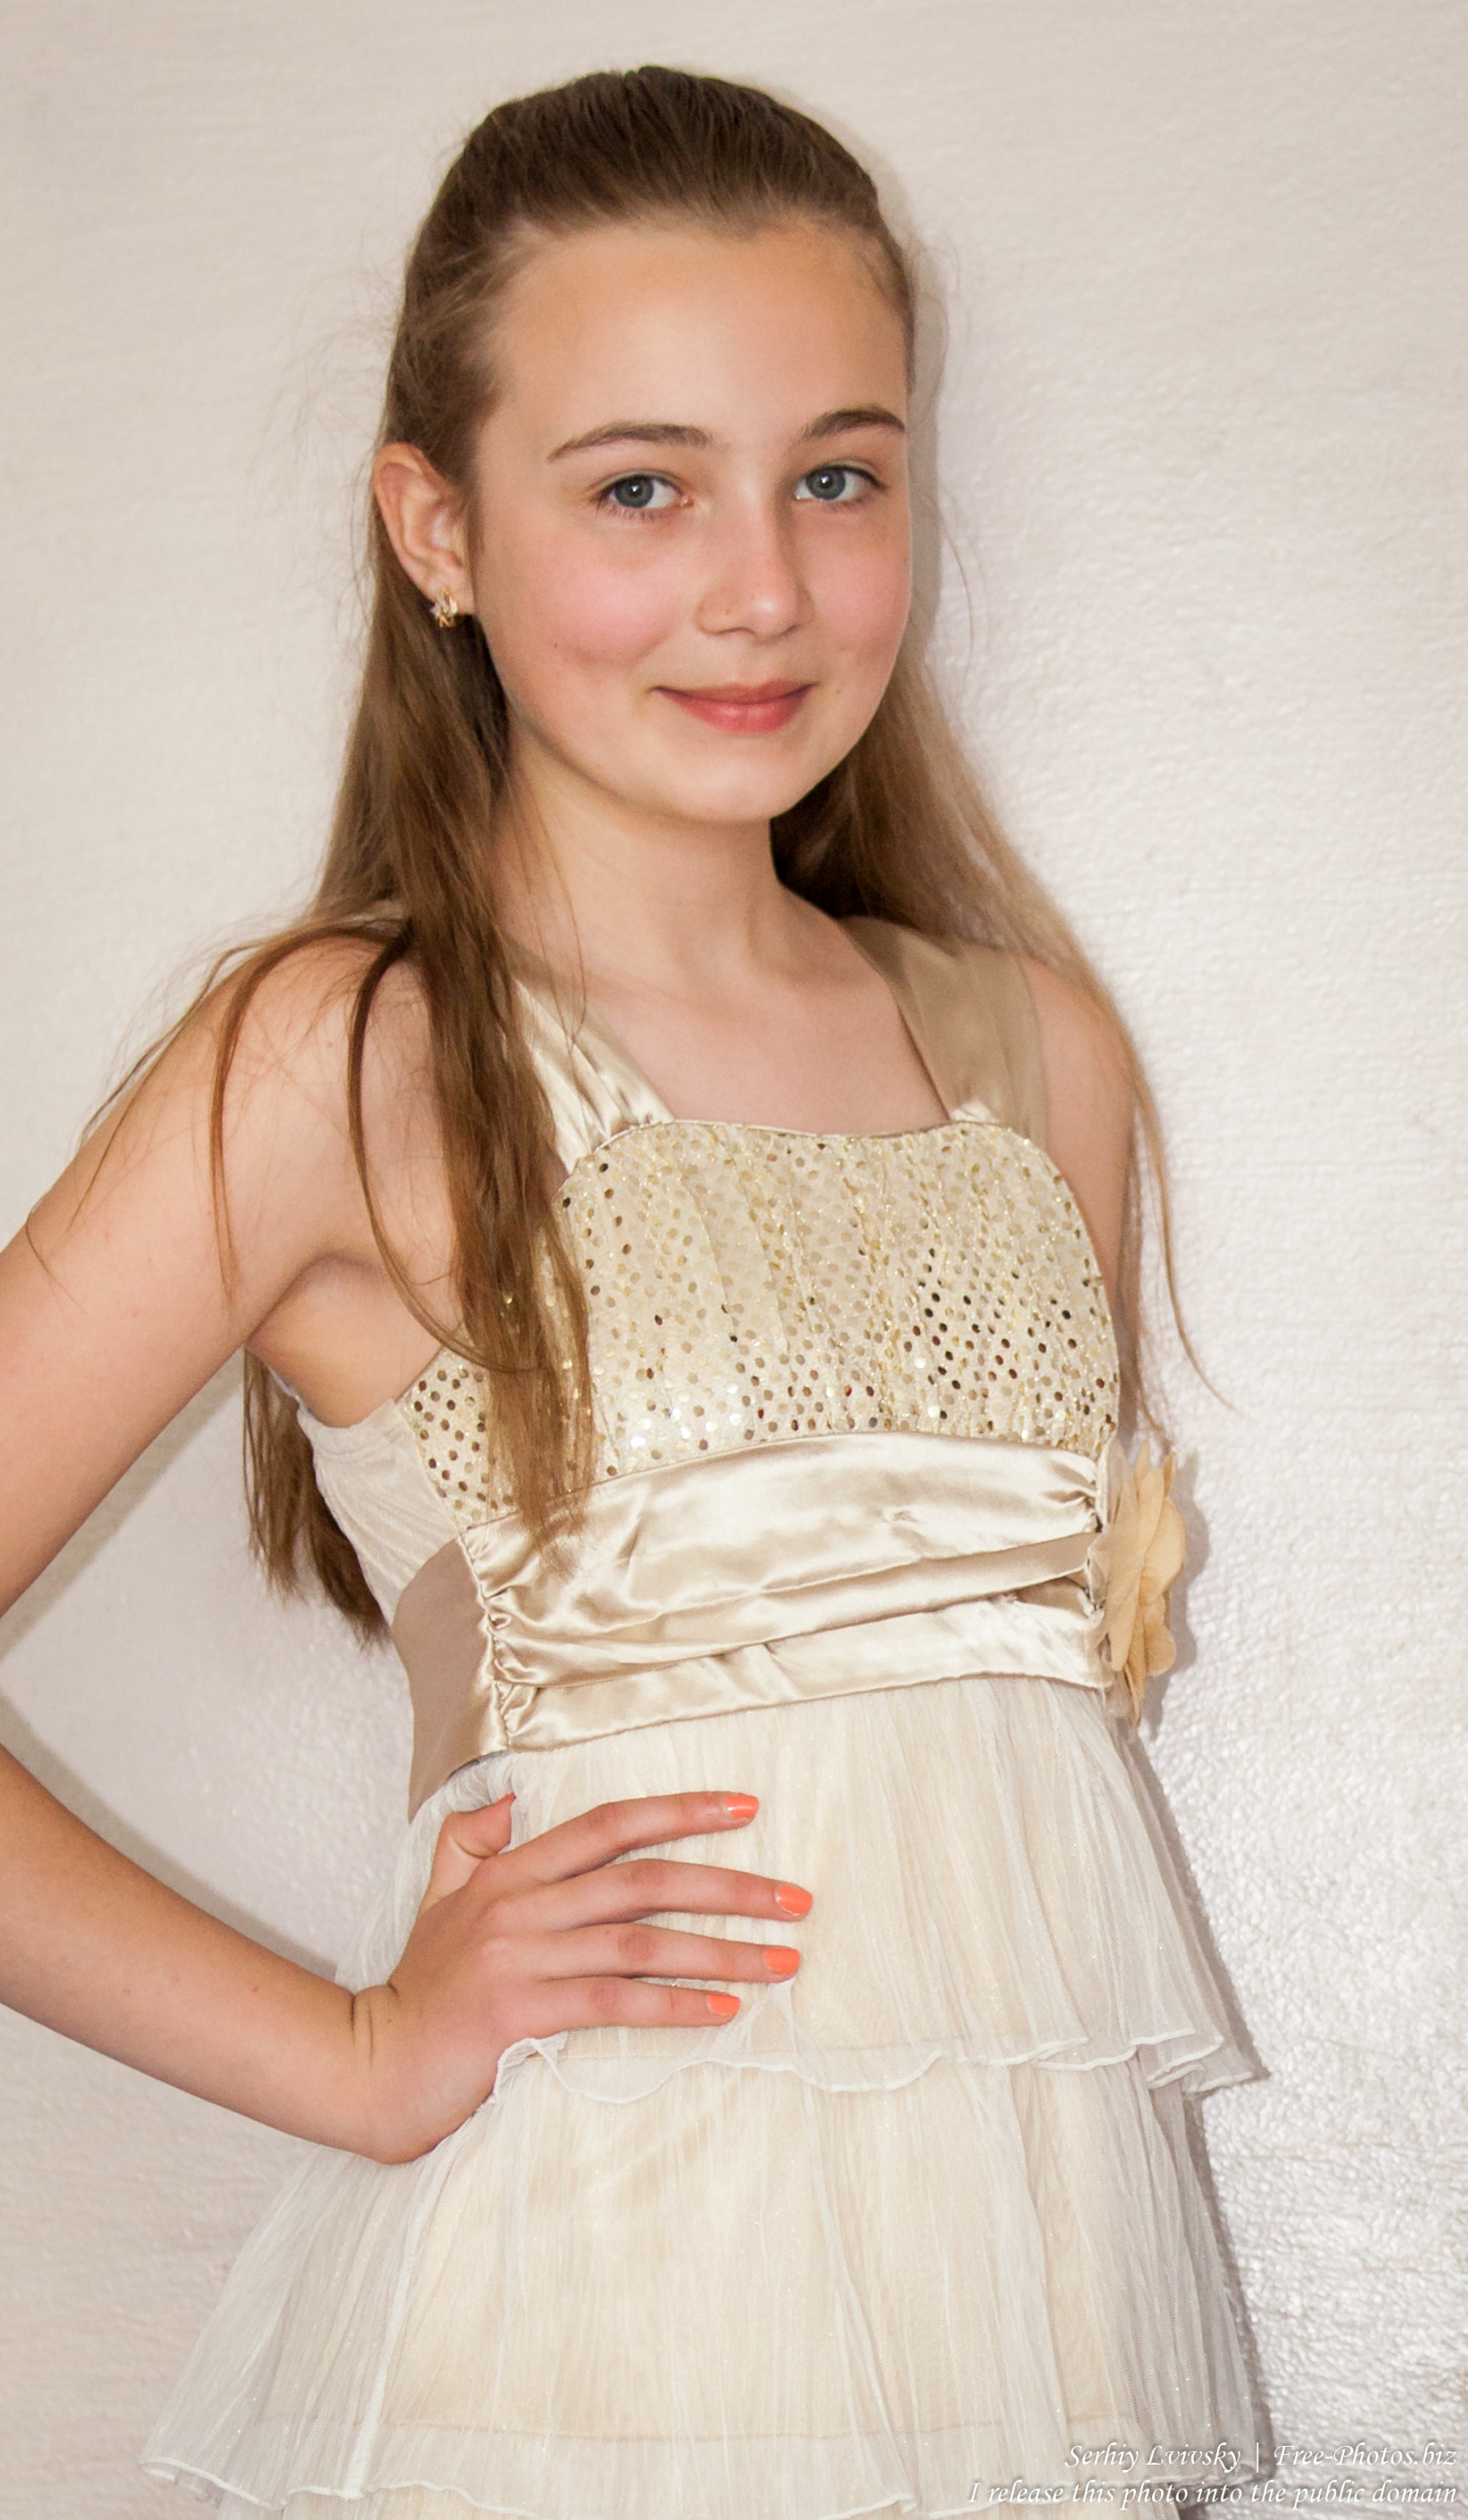 a beautiful schoolgirl wearing a dress photographed in June 2015, picture 12